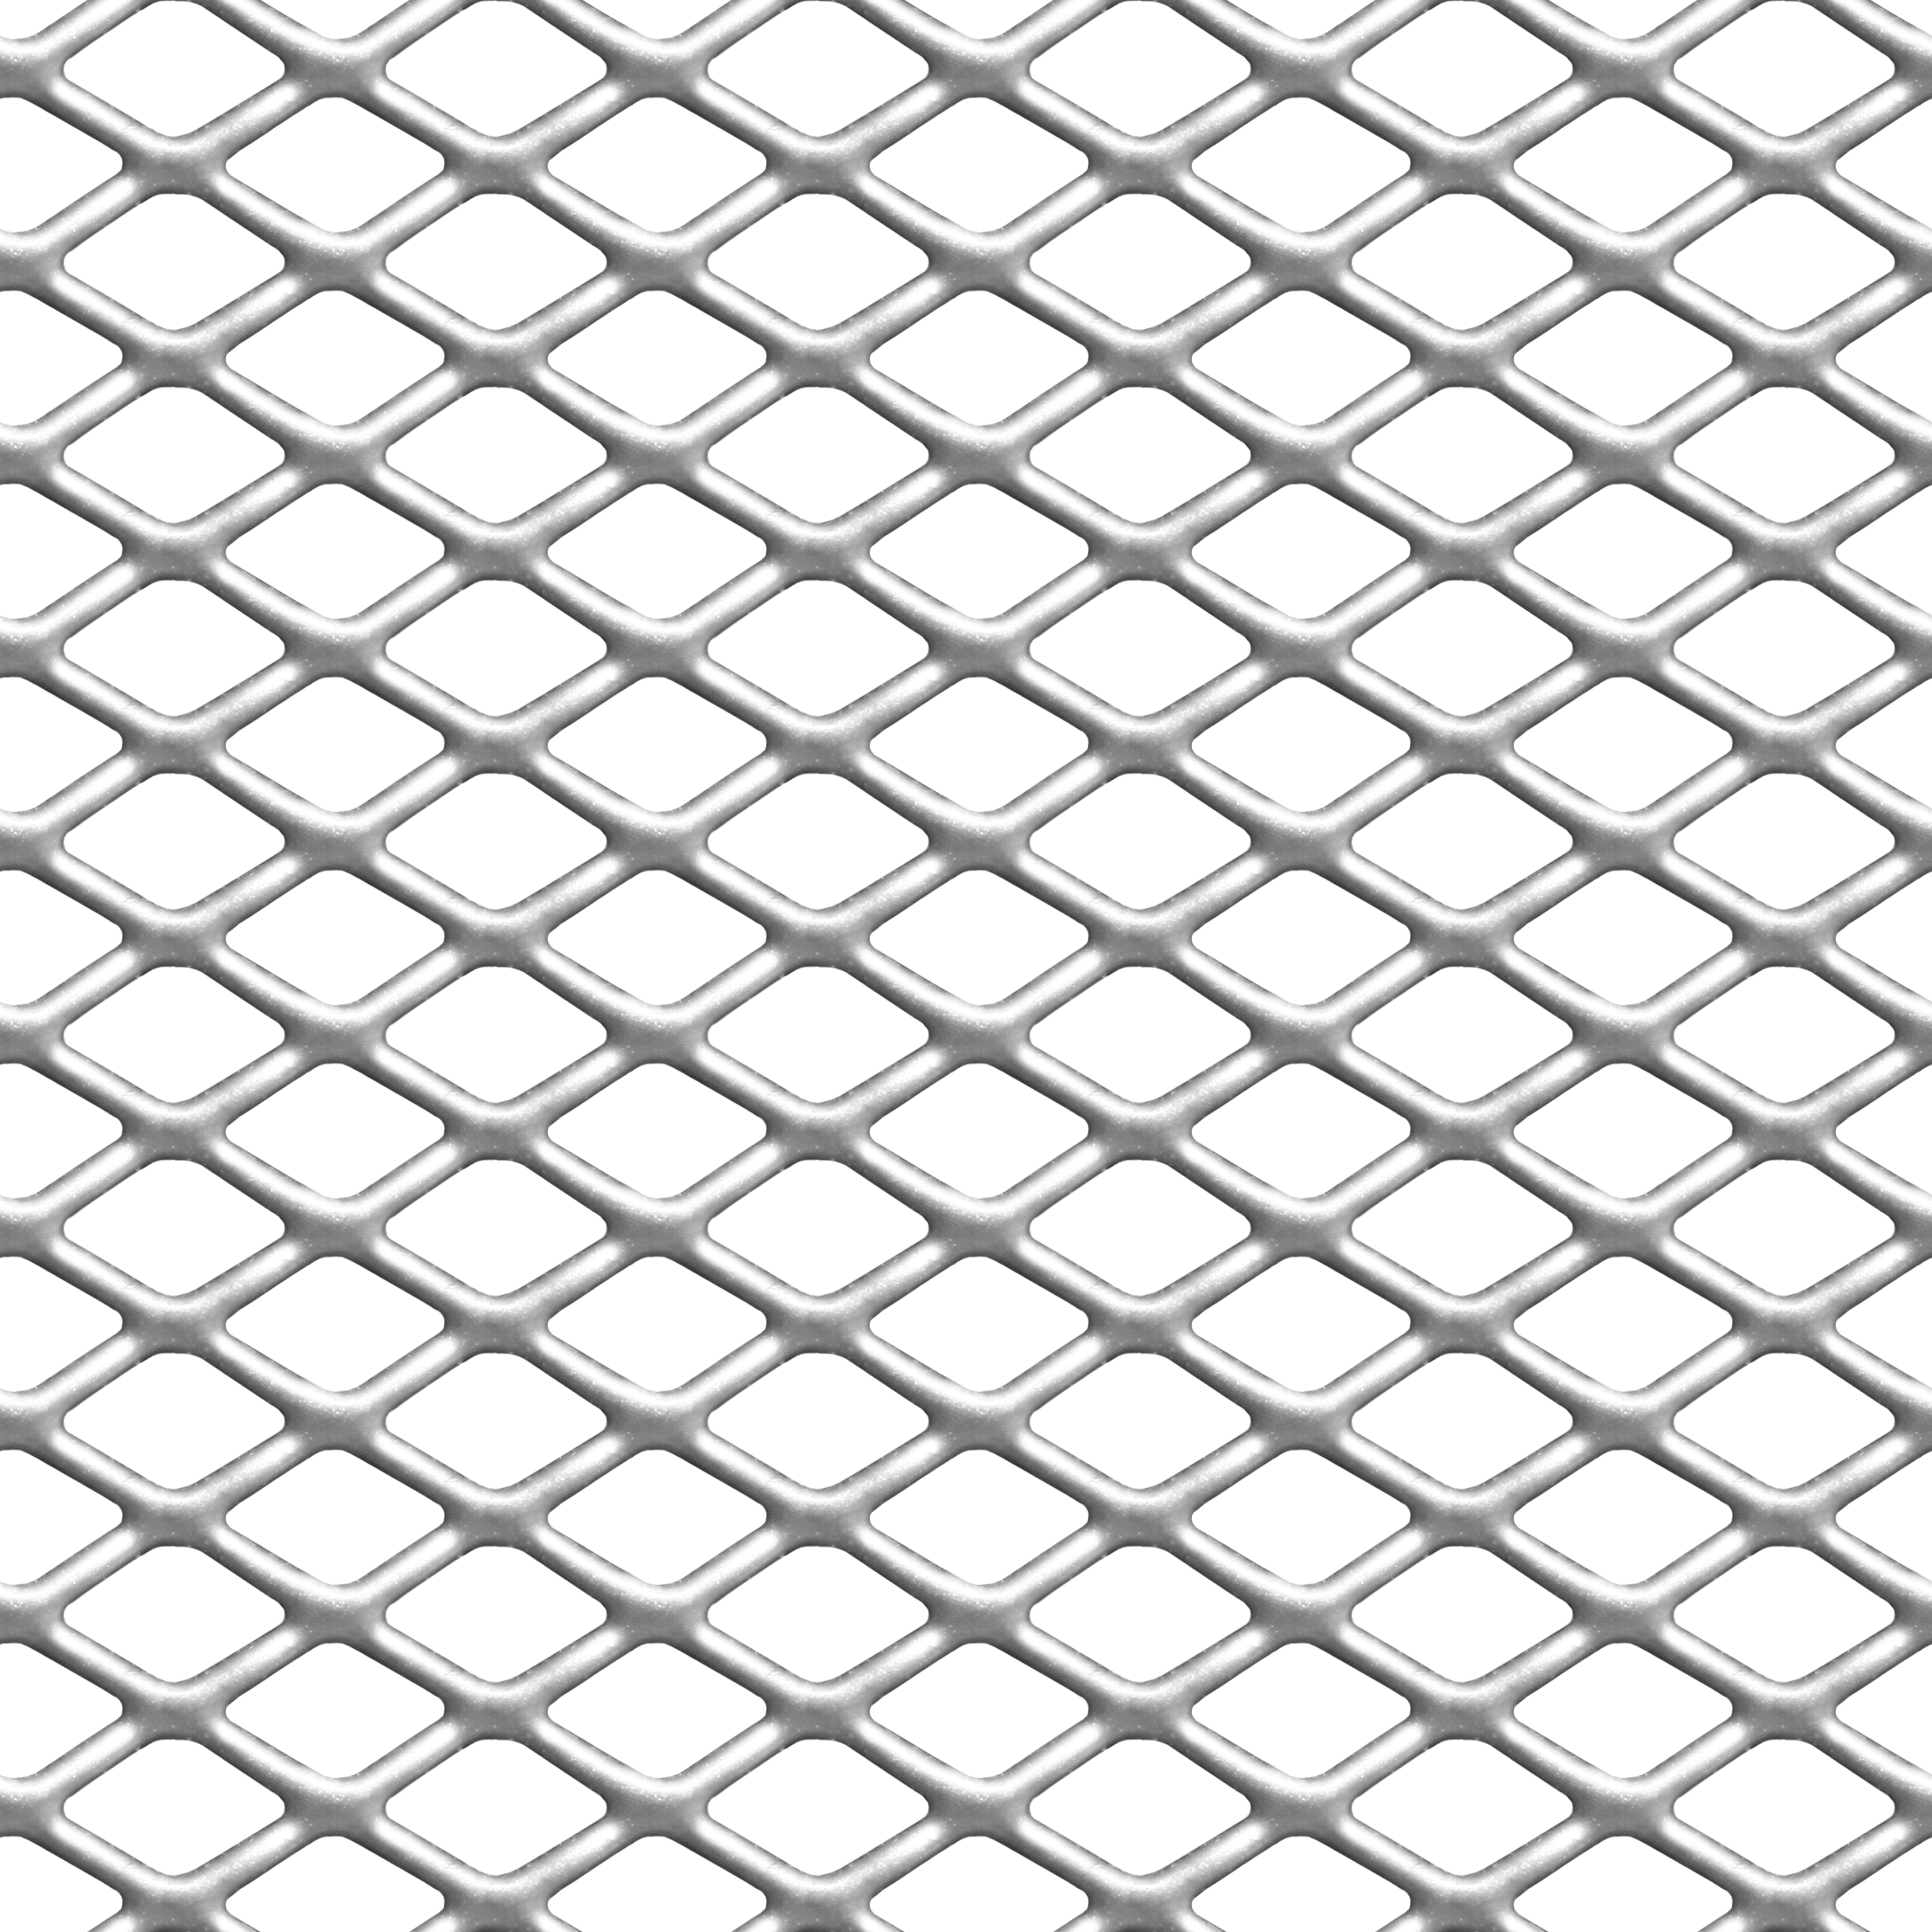 Fine metal mesh – Free Seamless Textures - All rights reseved